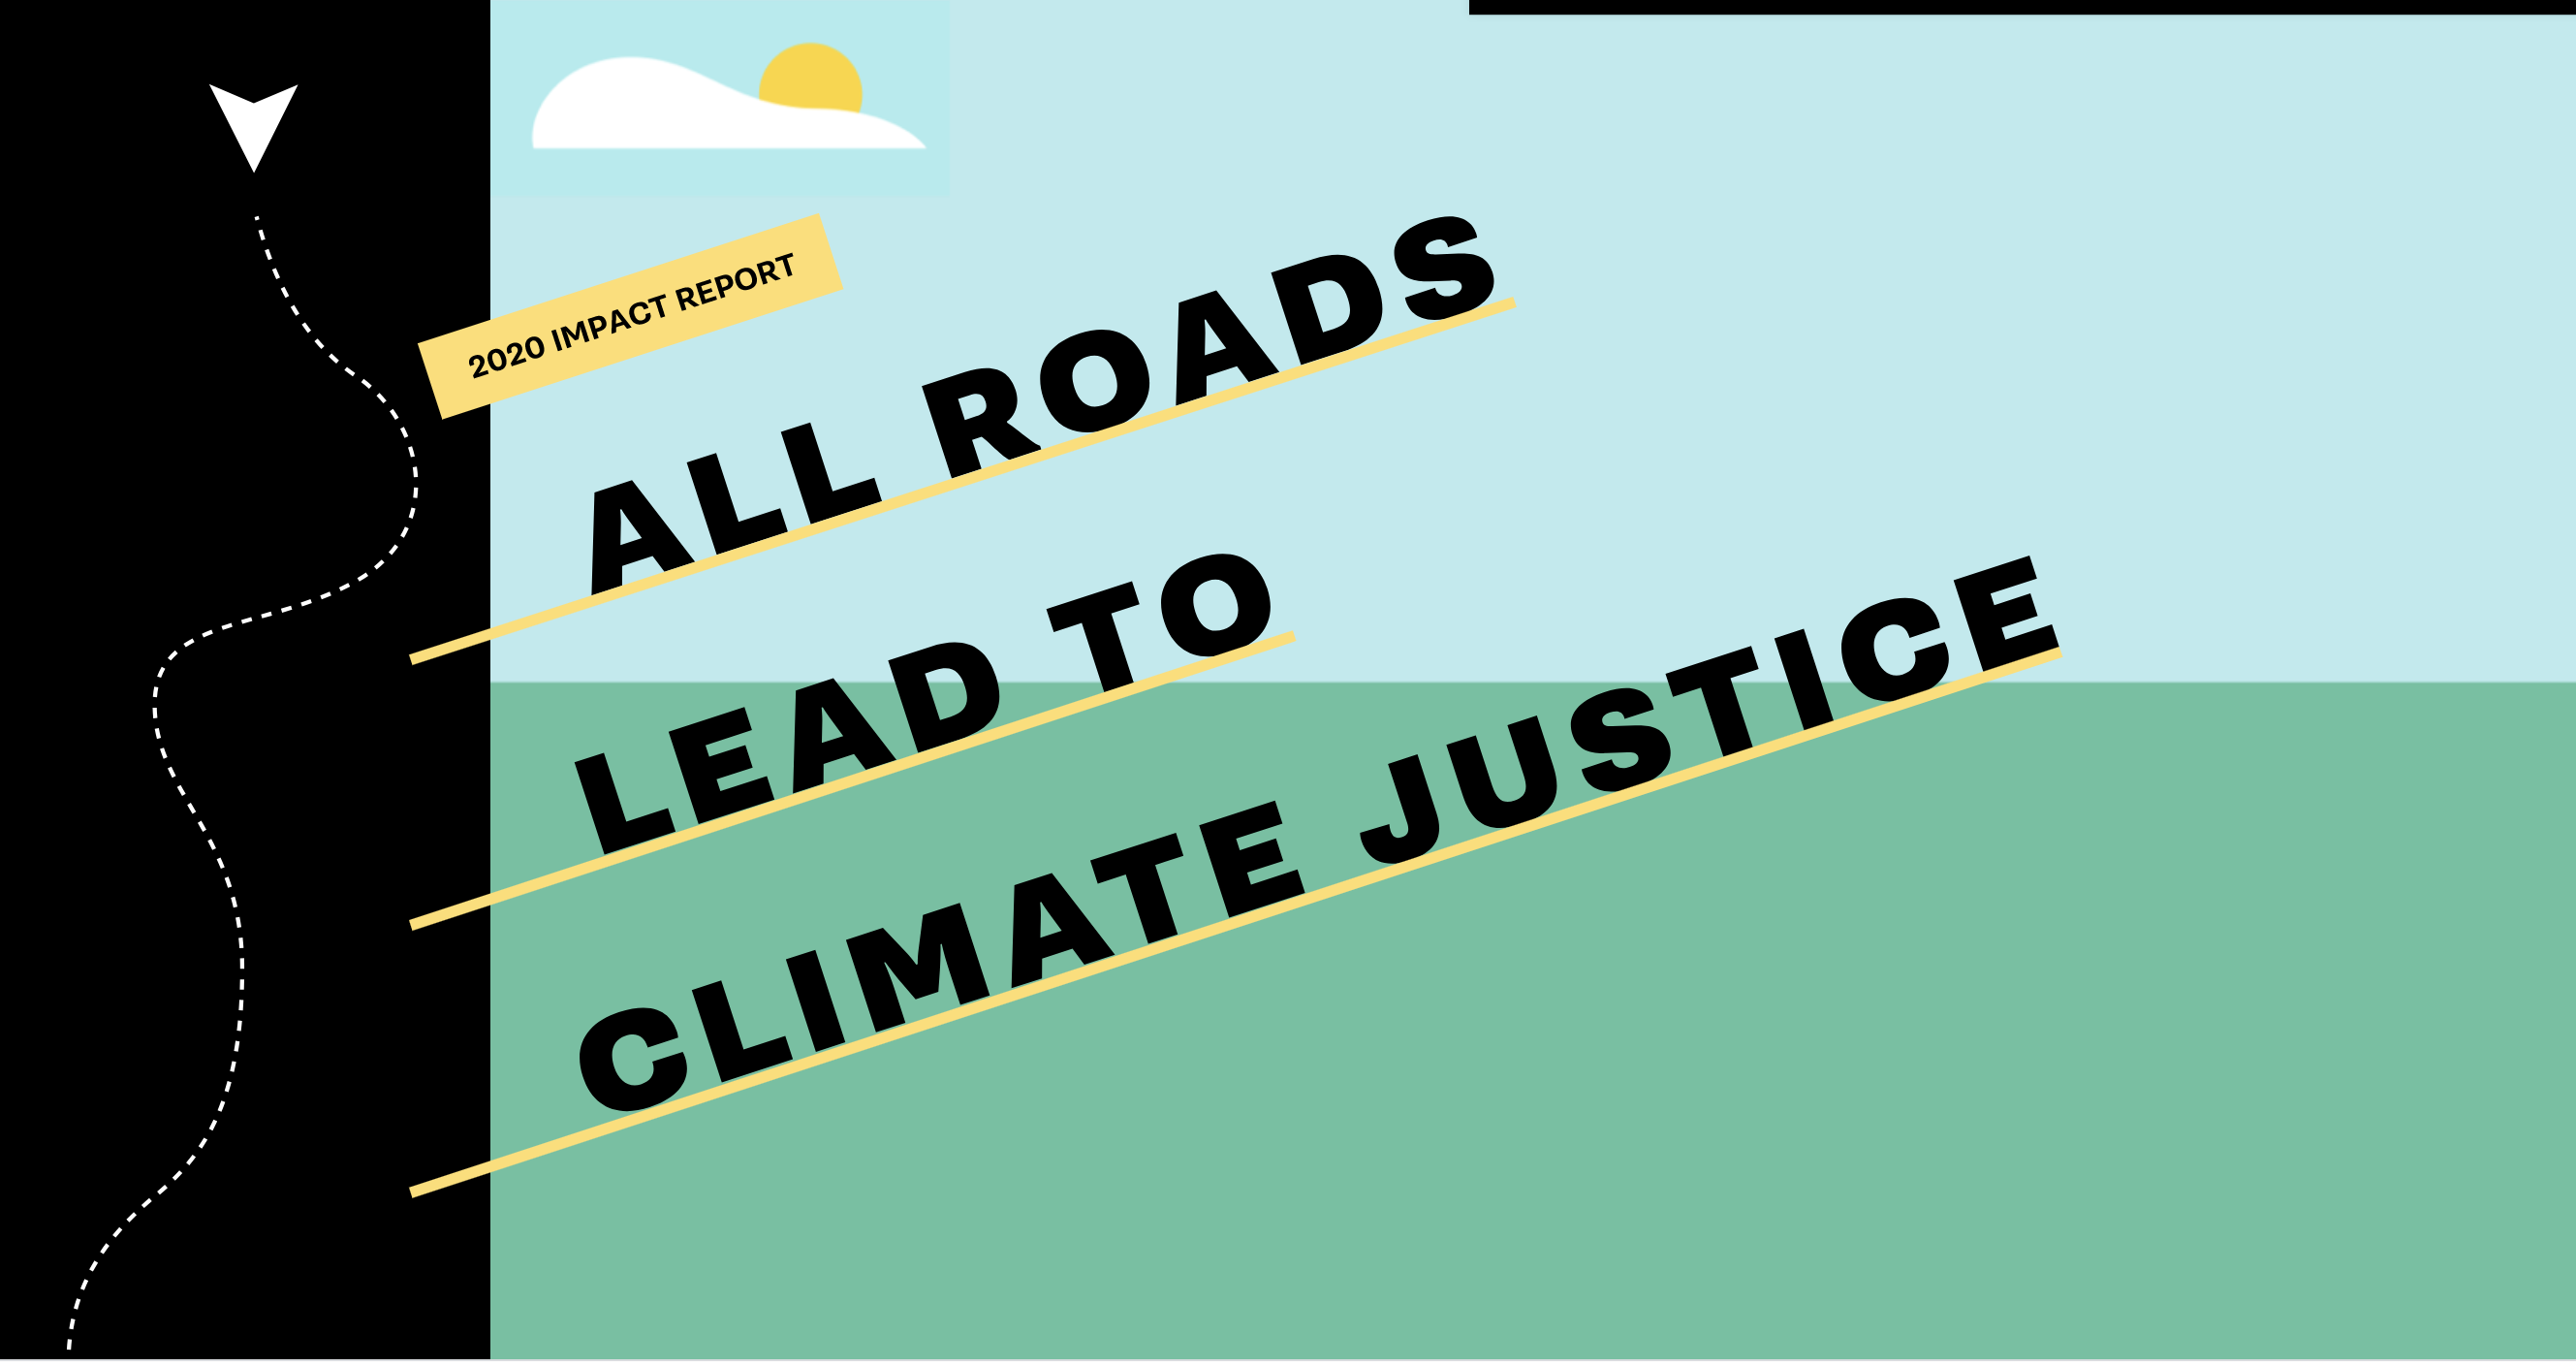 All roads lead to climate justice